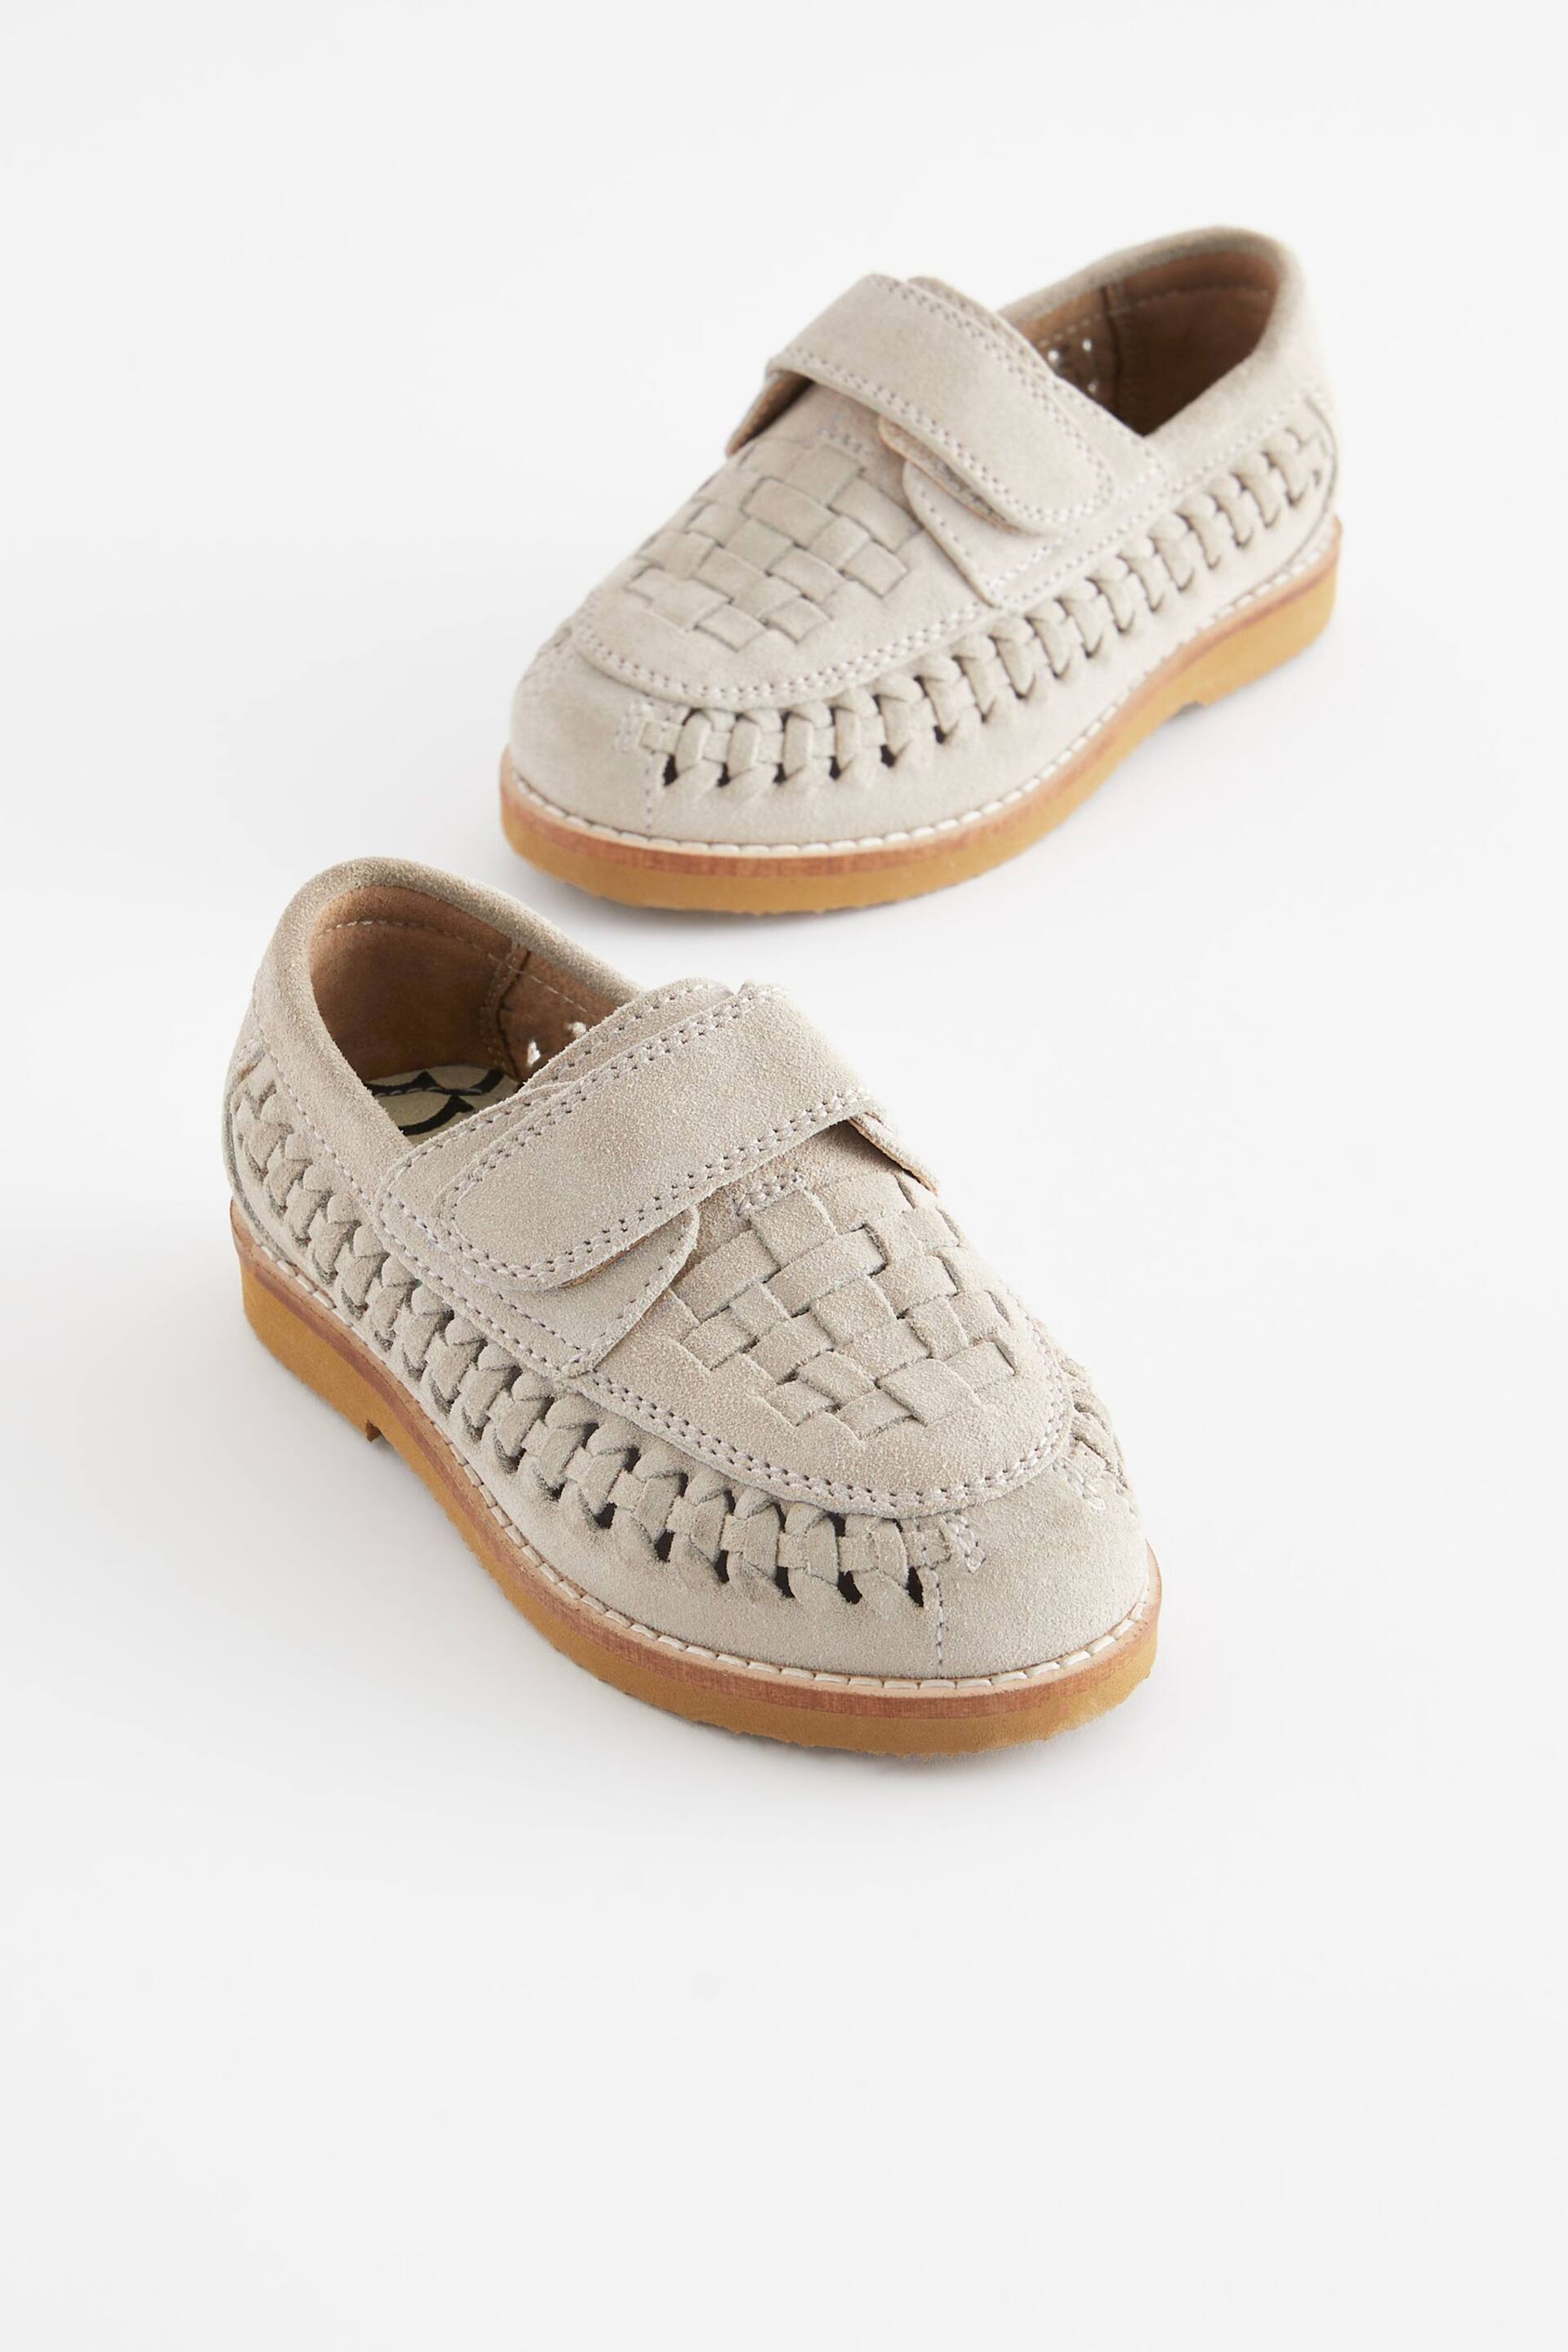 Stone Neutral Woven Loafers - Image 1 of 5